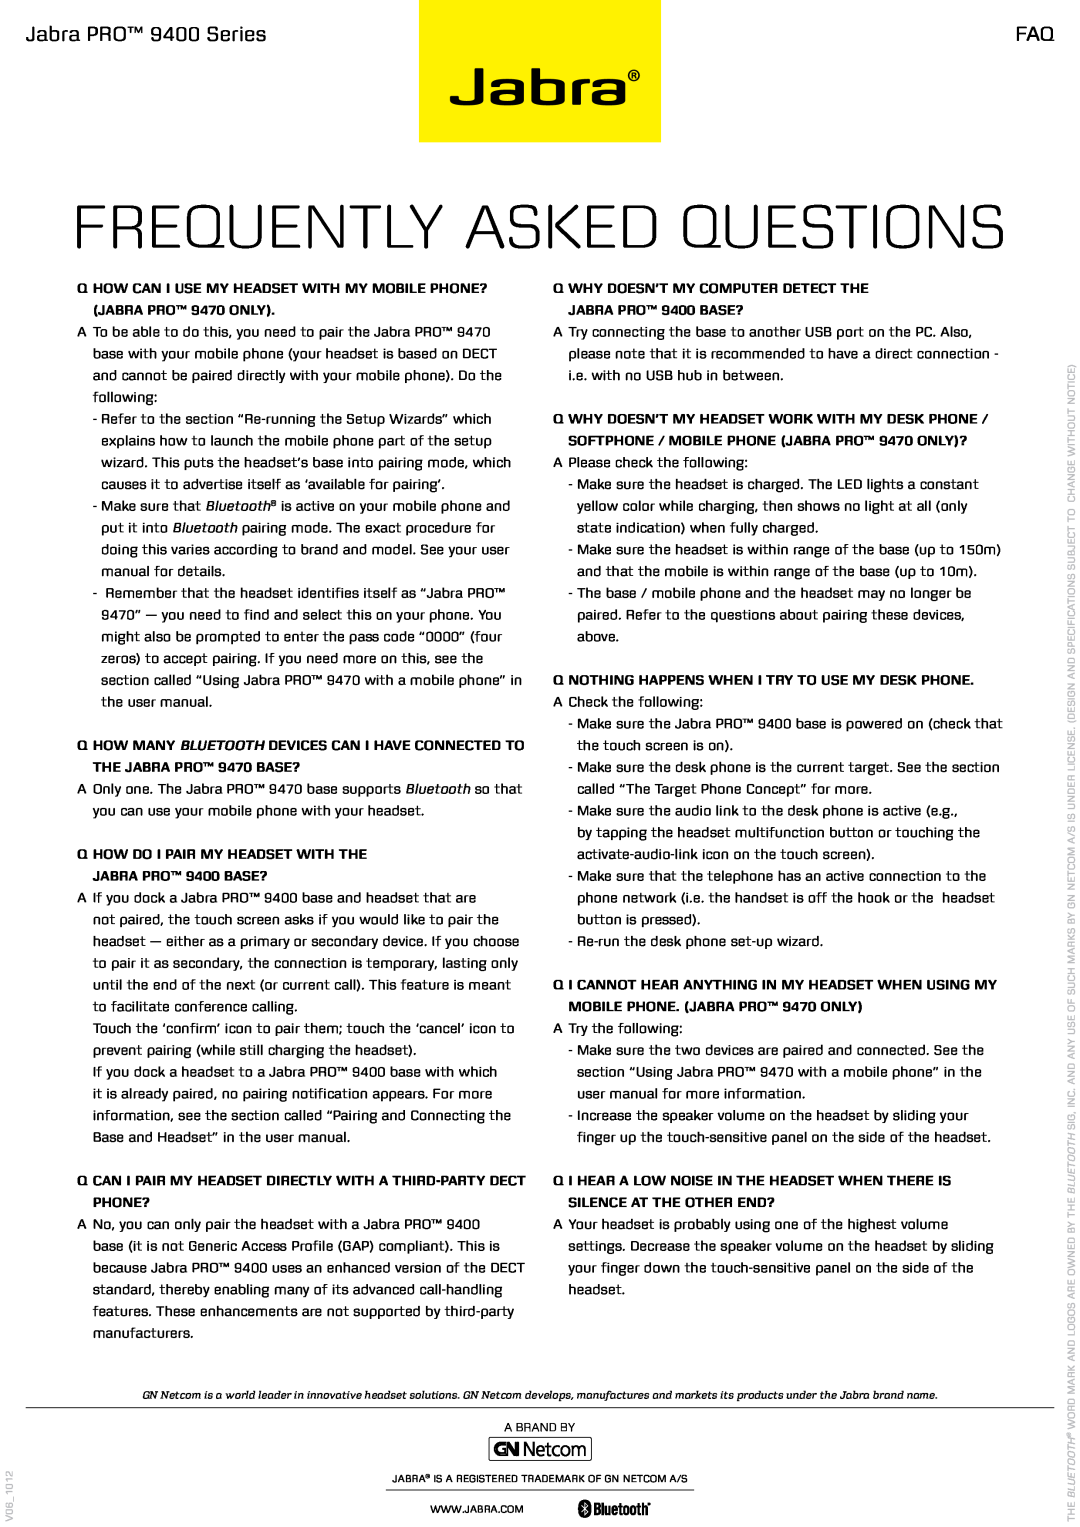 Jabra user manual Frequently asked questions, Jabra PRO 9400 Series 